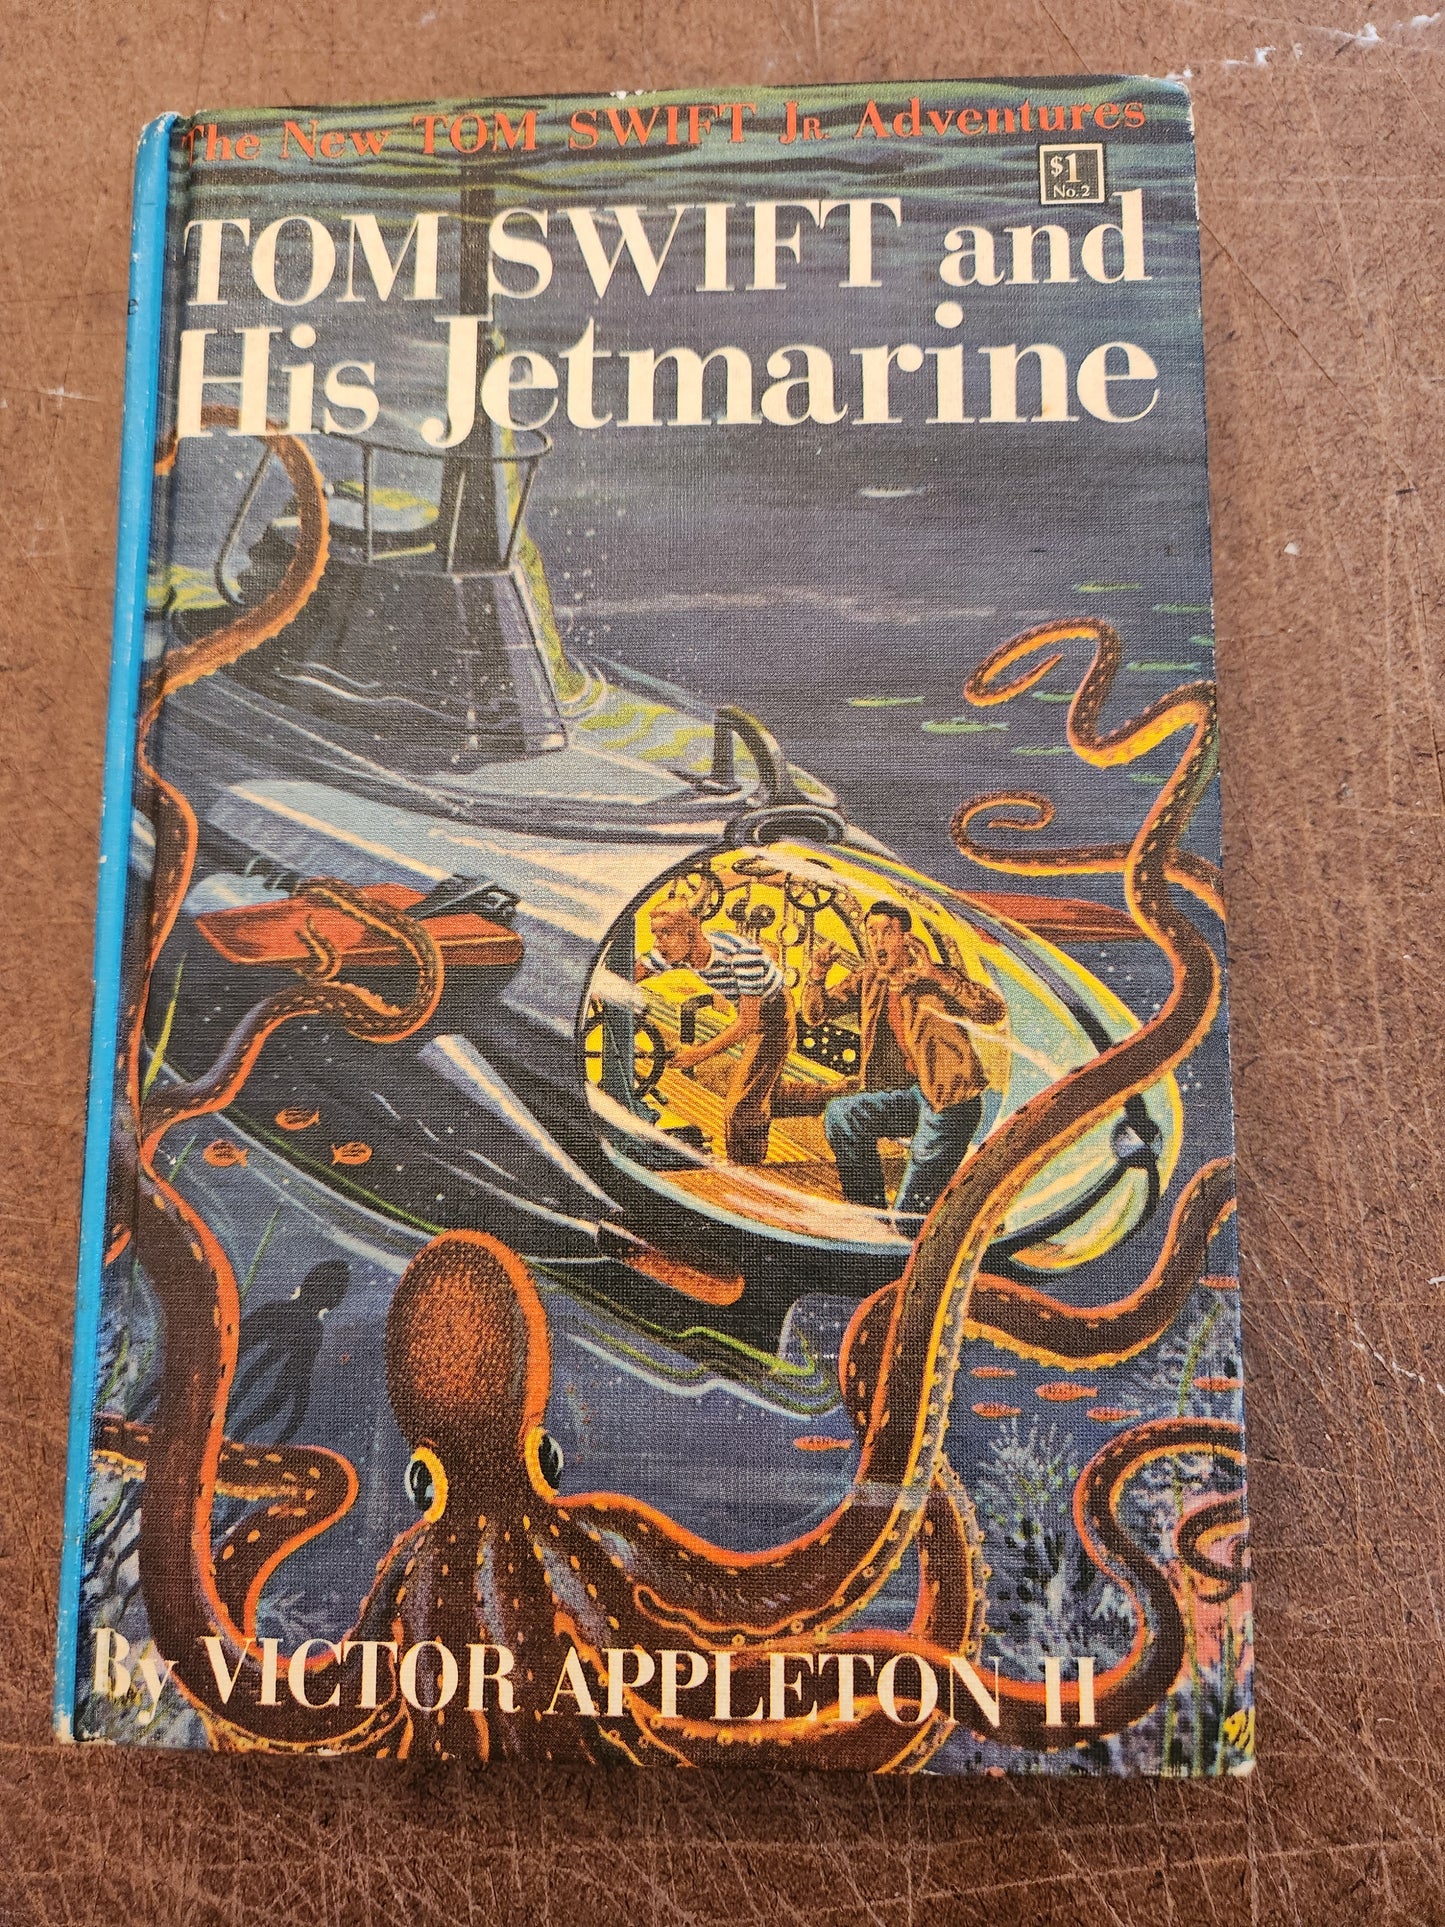 "Tom Swift and His Jetmarine" by Victor Appleton II (Blue Spine)